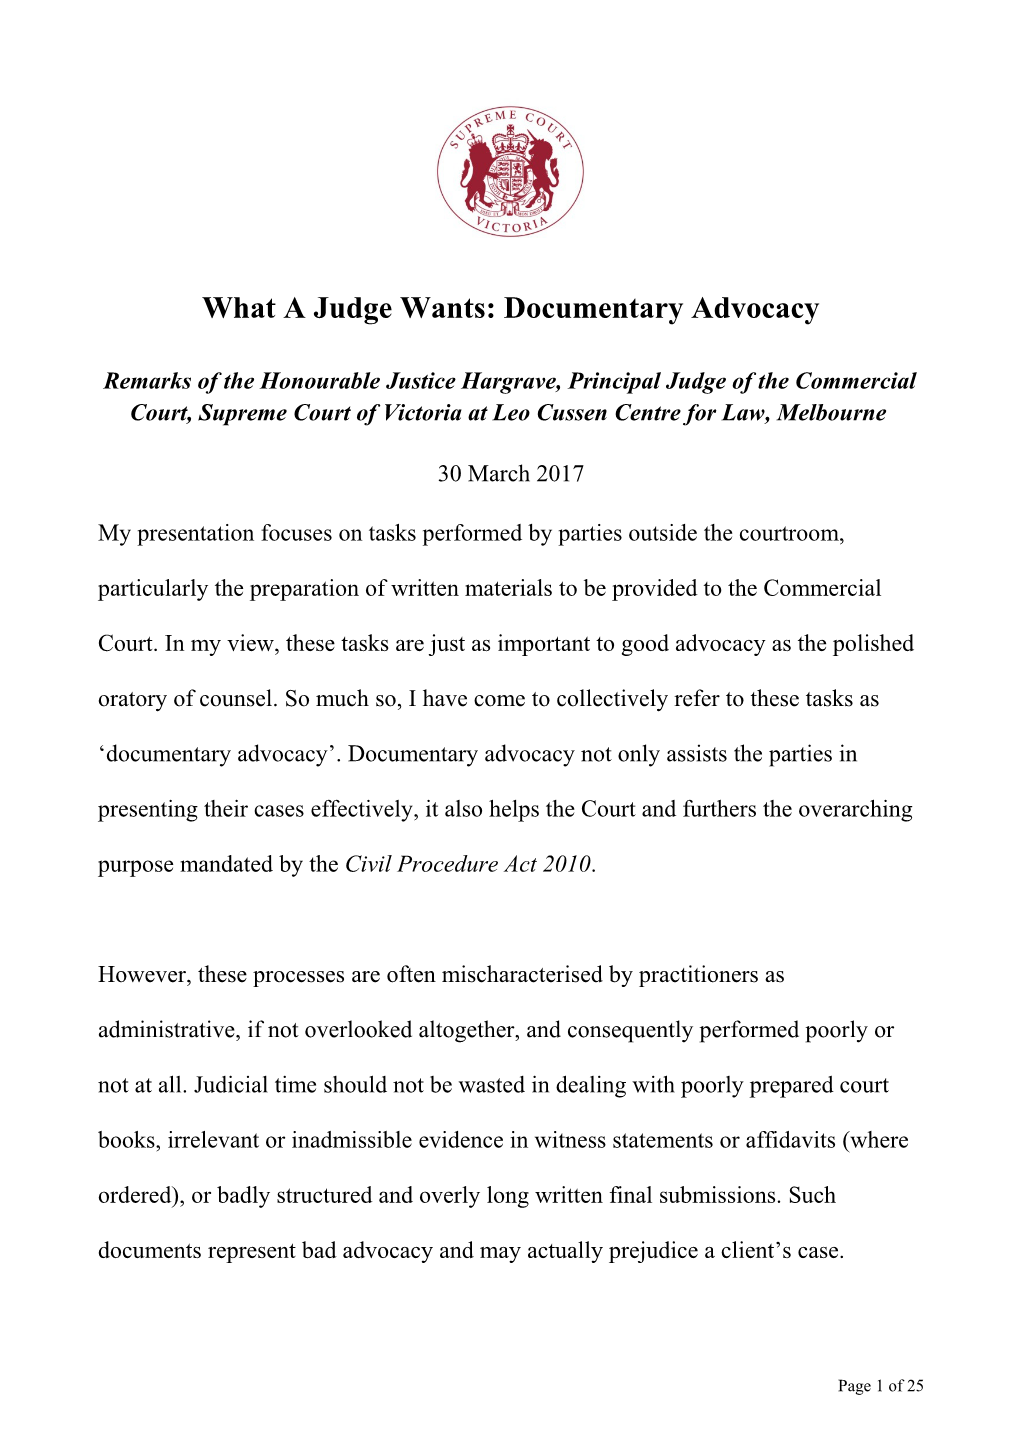 What a Judge Wants: Documentary Advocacy